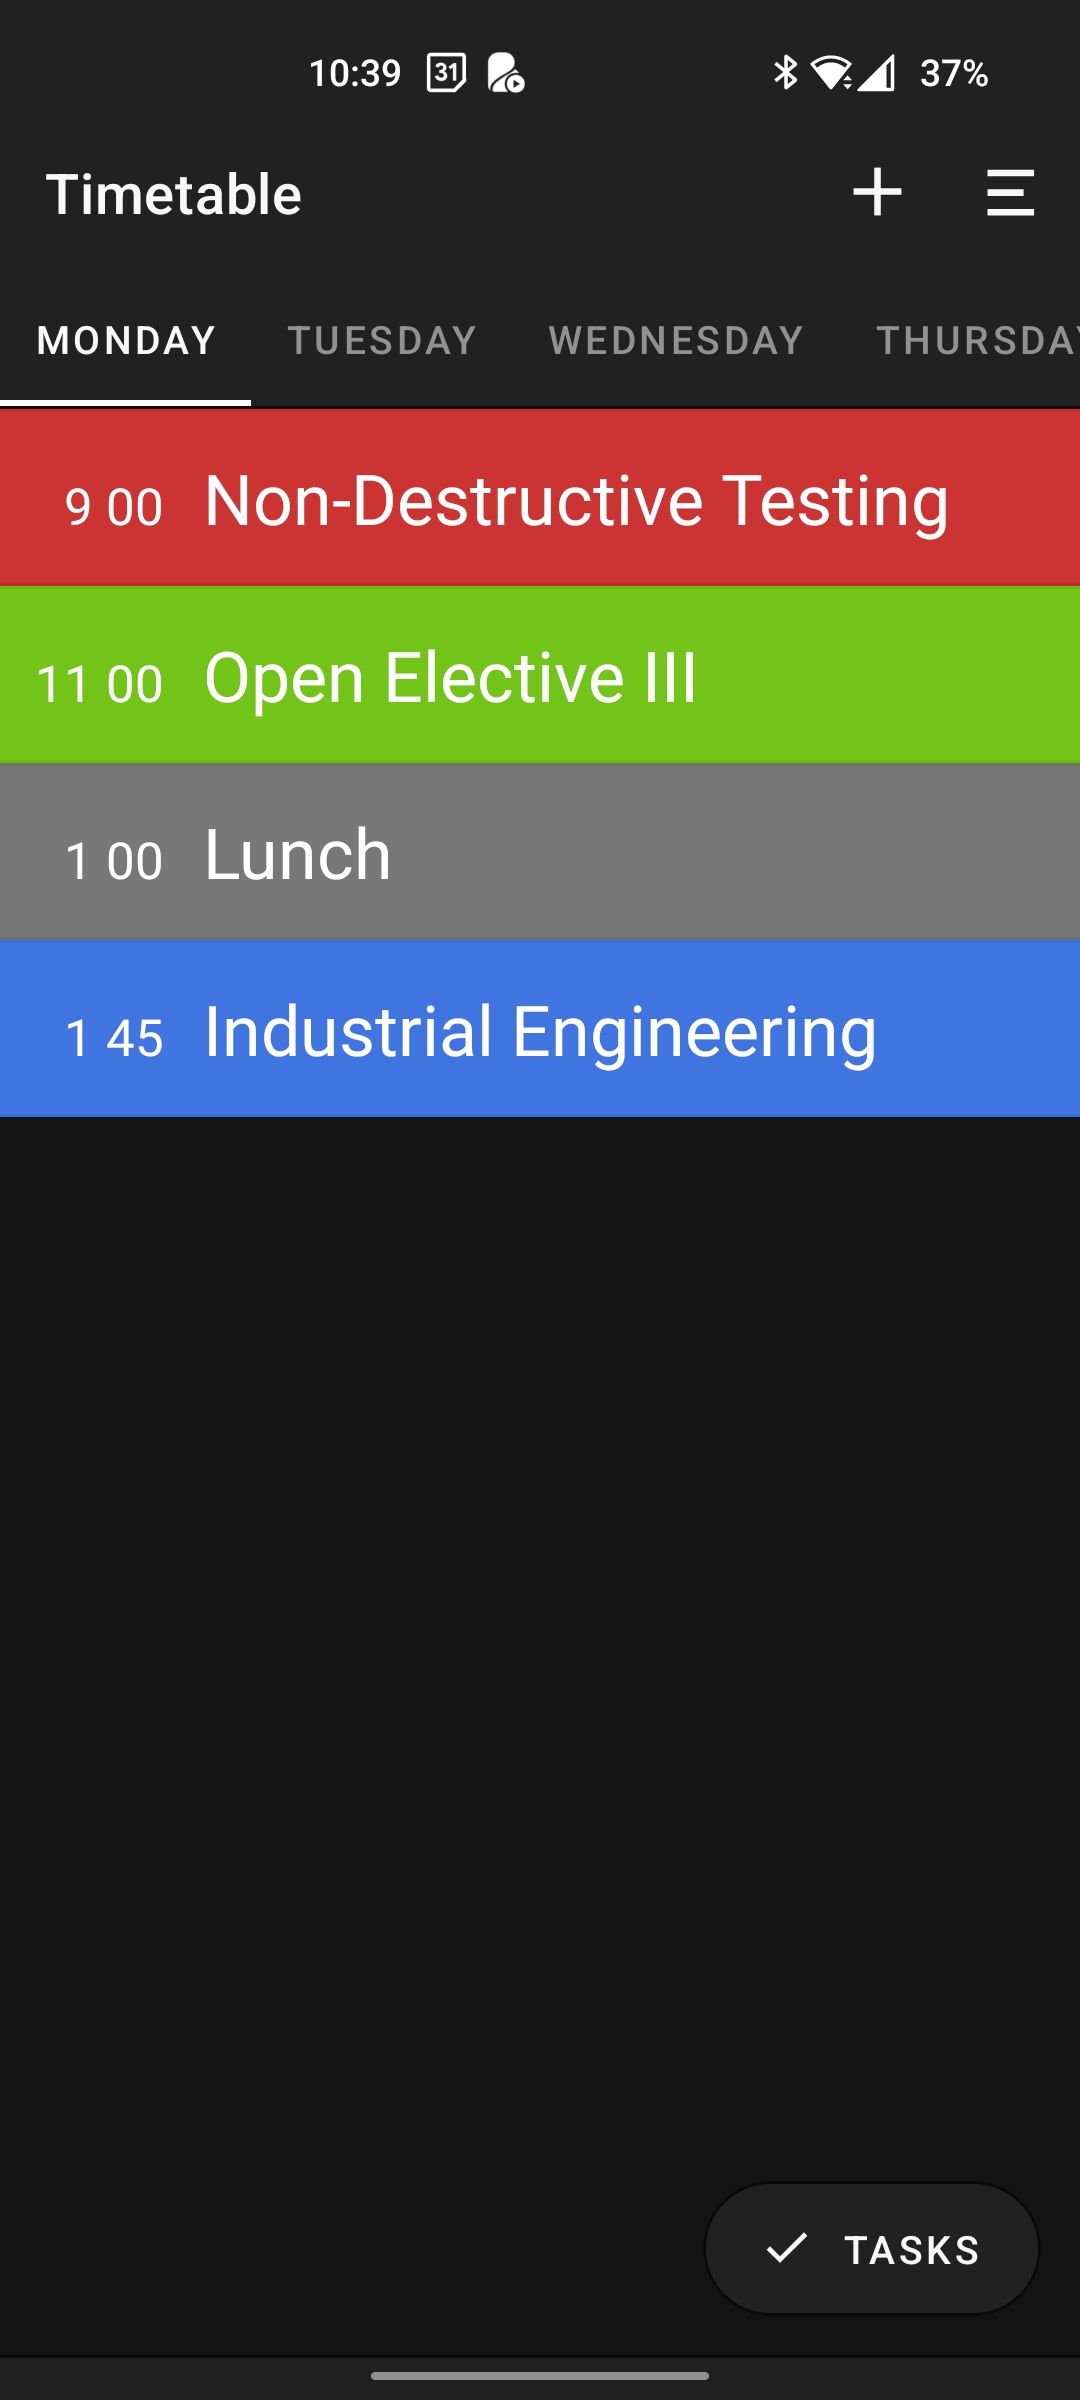 Class Timetable with a list of classes